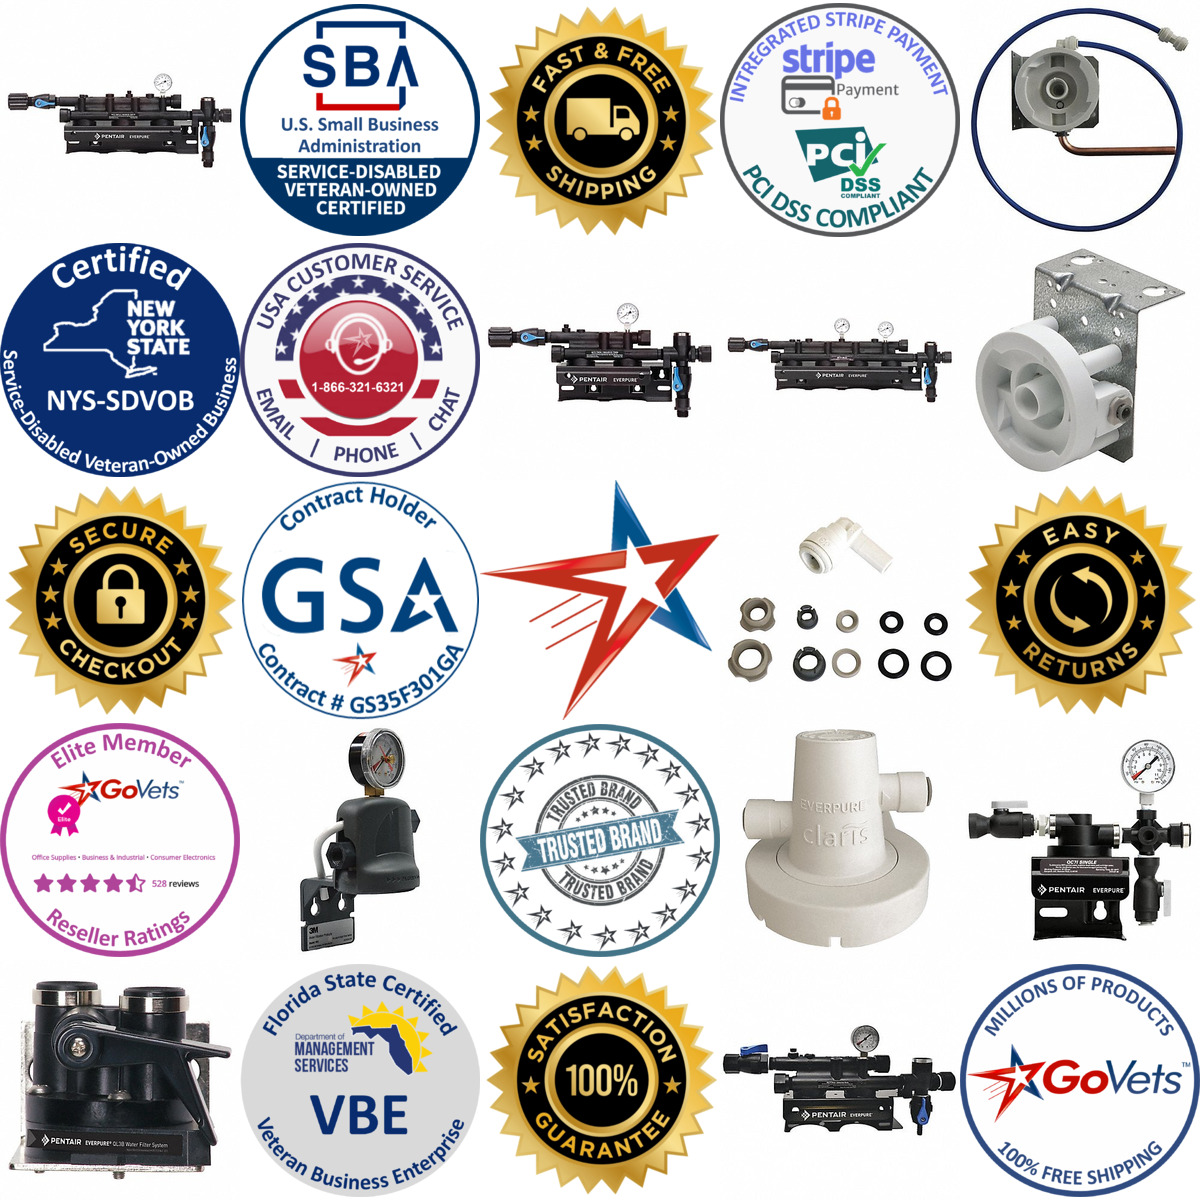 A selection of Filter Heads products on GoVets